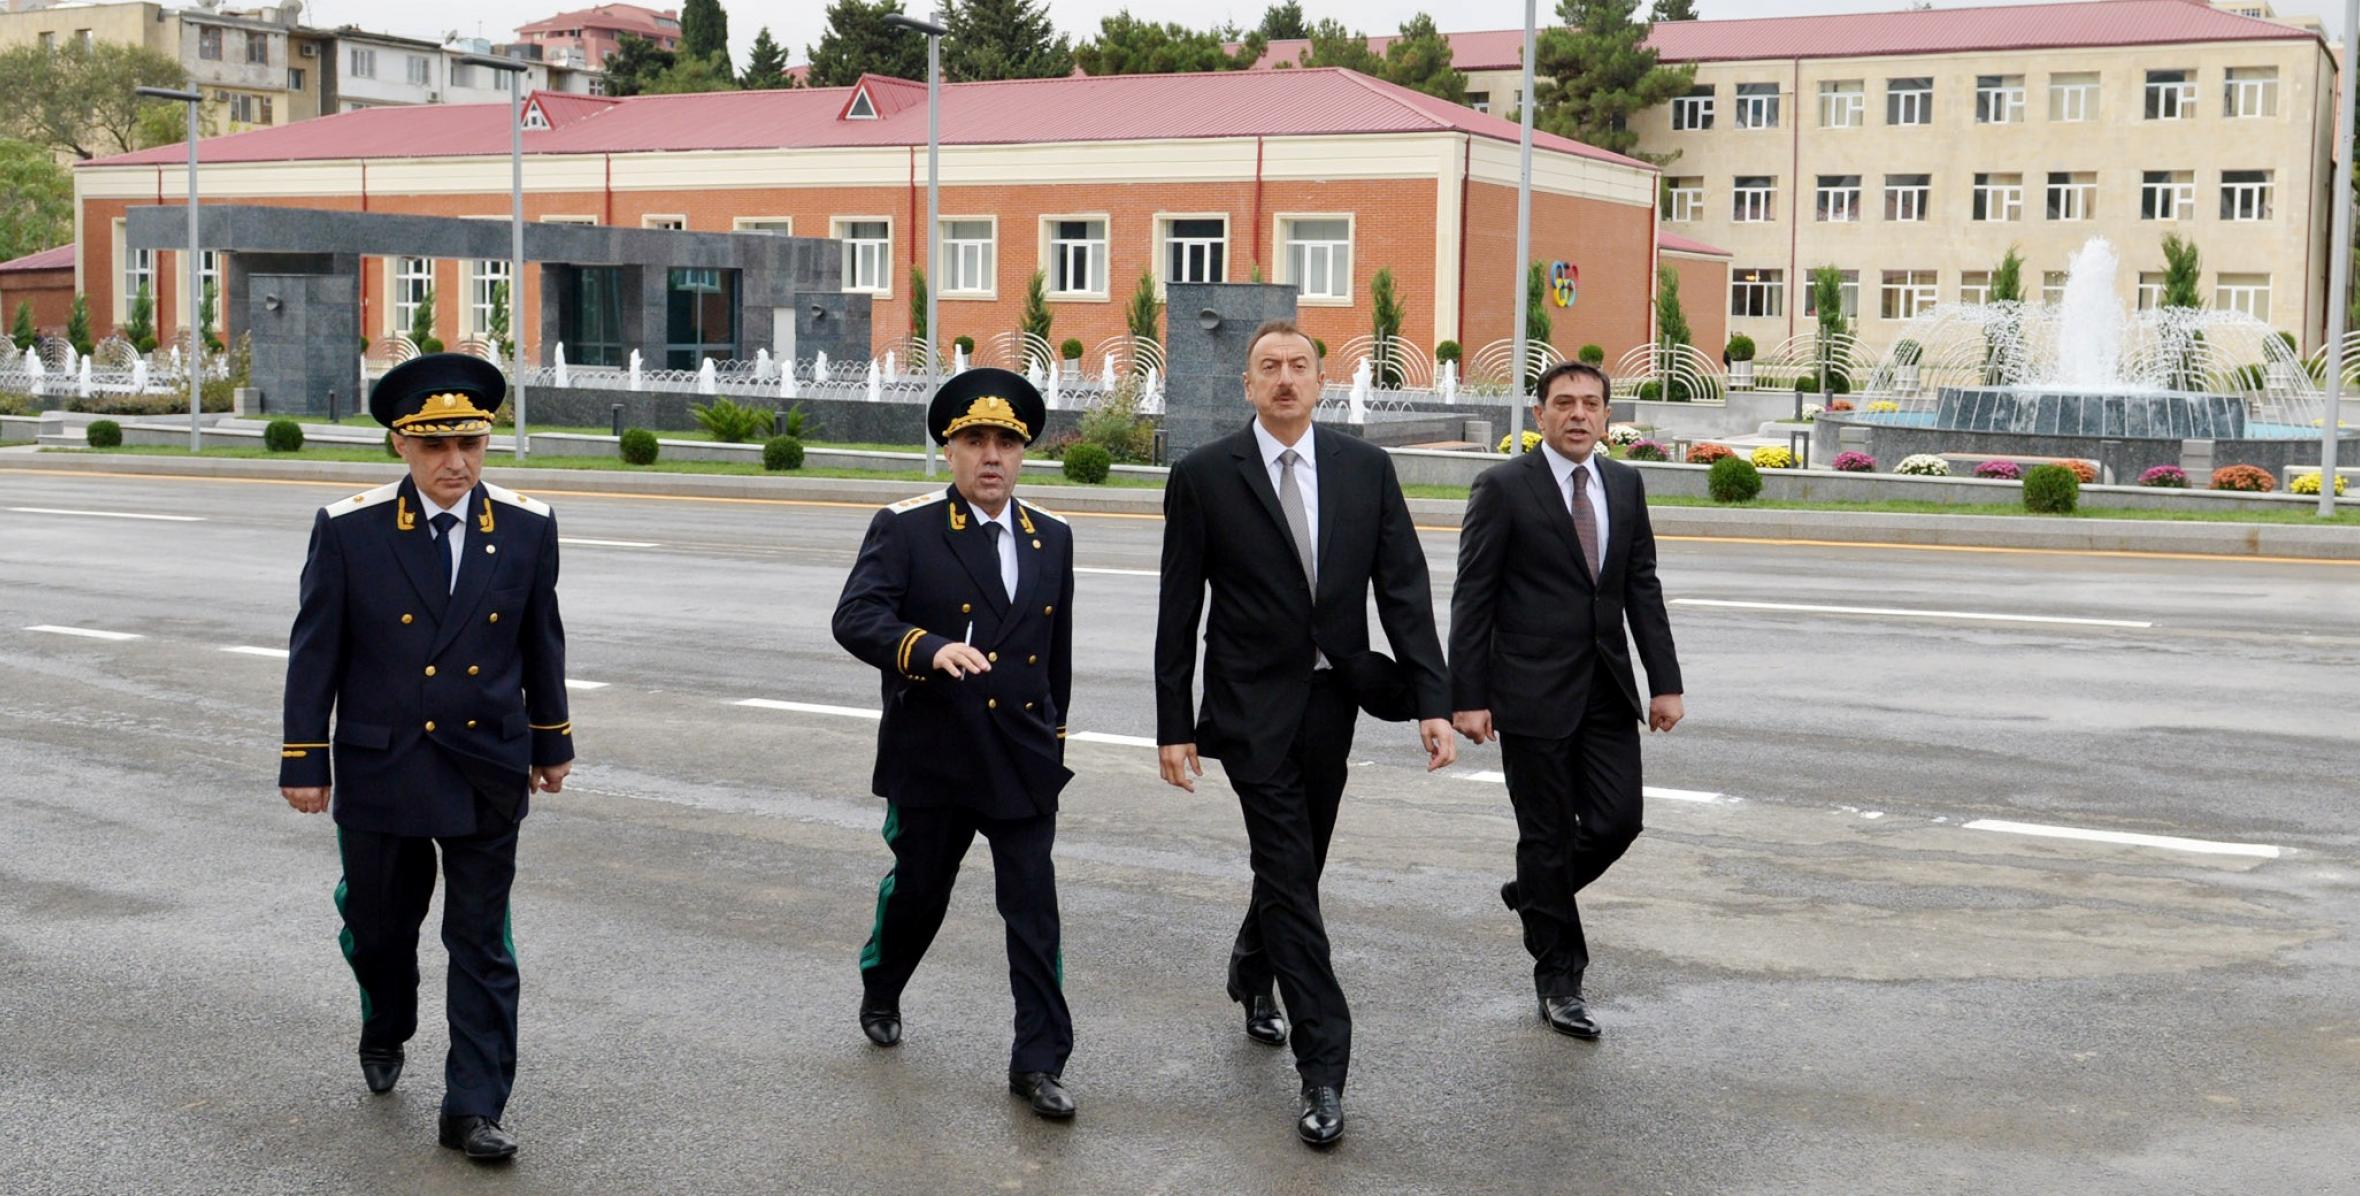 Ilham Aliyev attended the opening of a new office building of the Anti-Corruption Department under the Prosecutor-General of the Republic of Azerbaijan